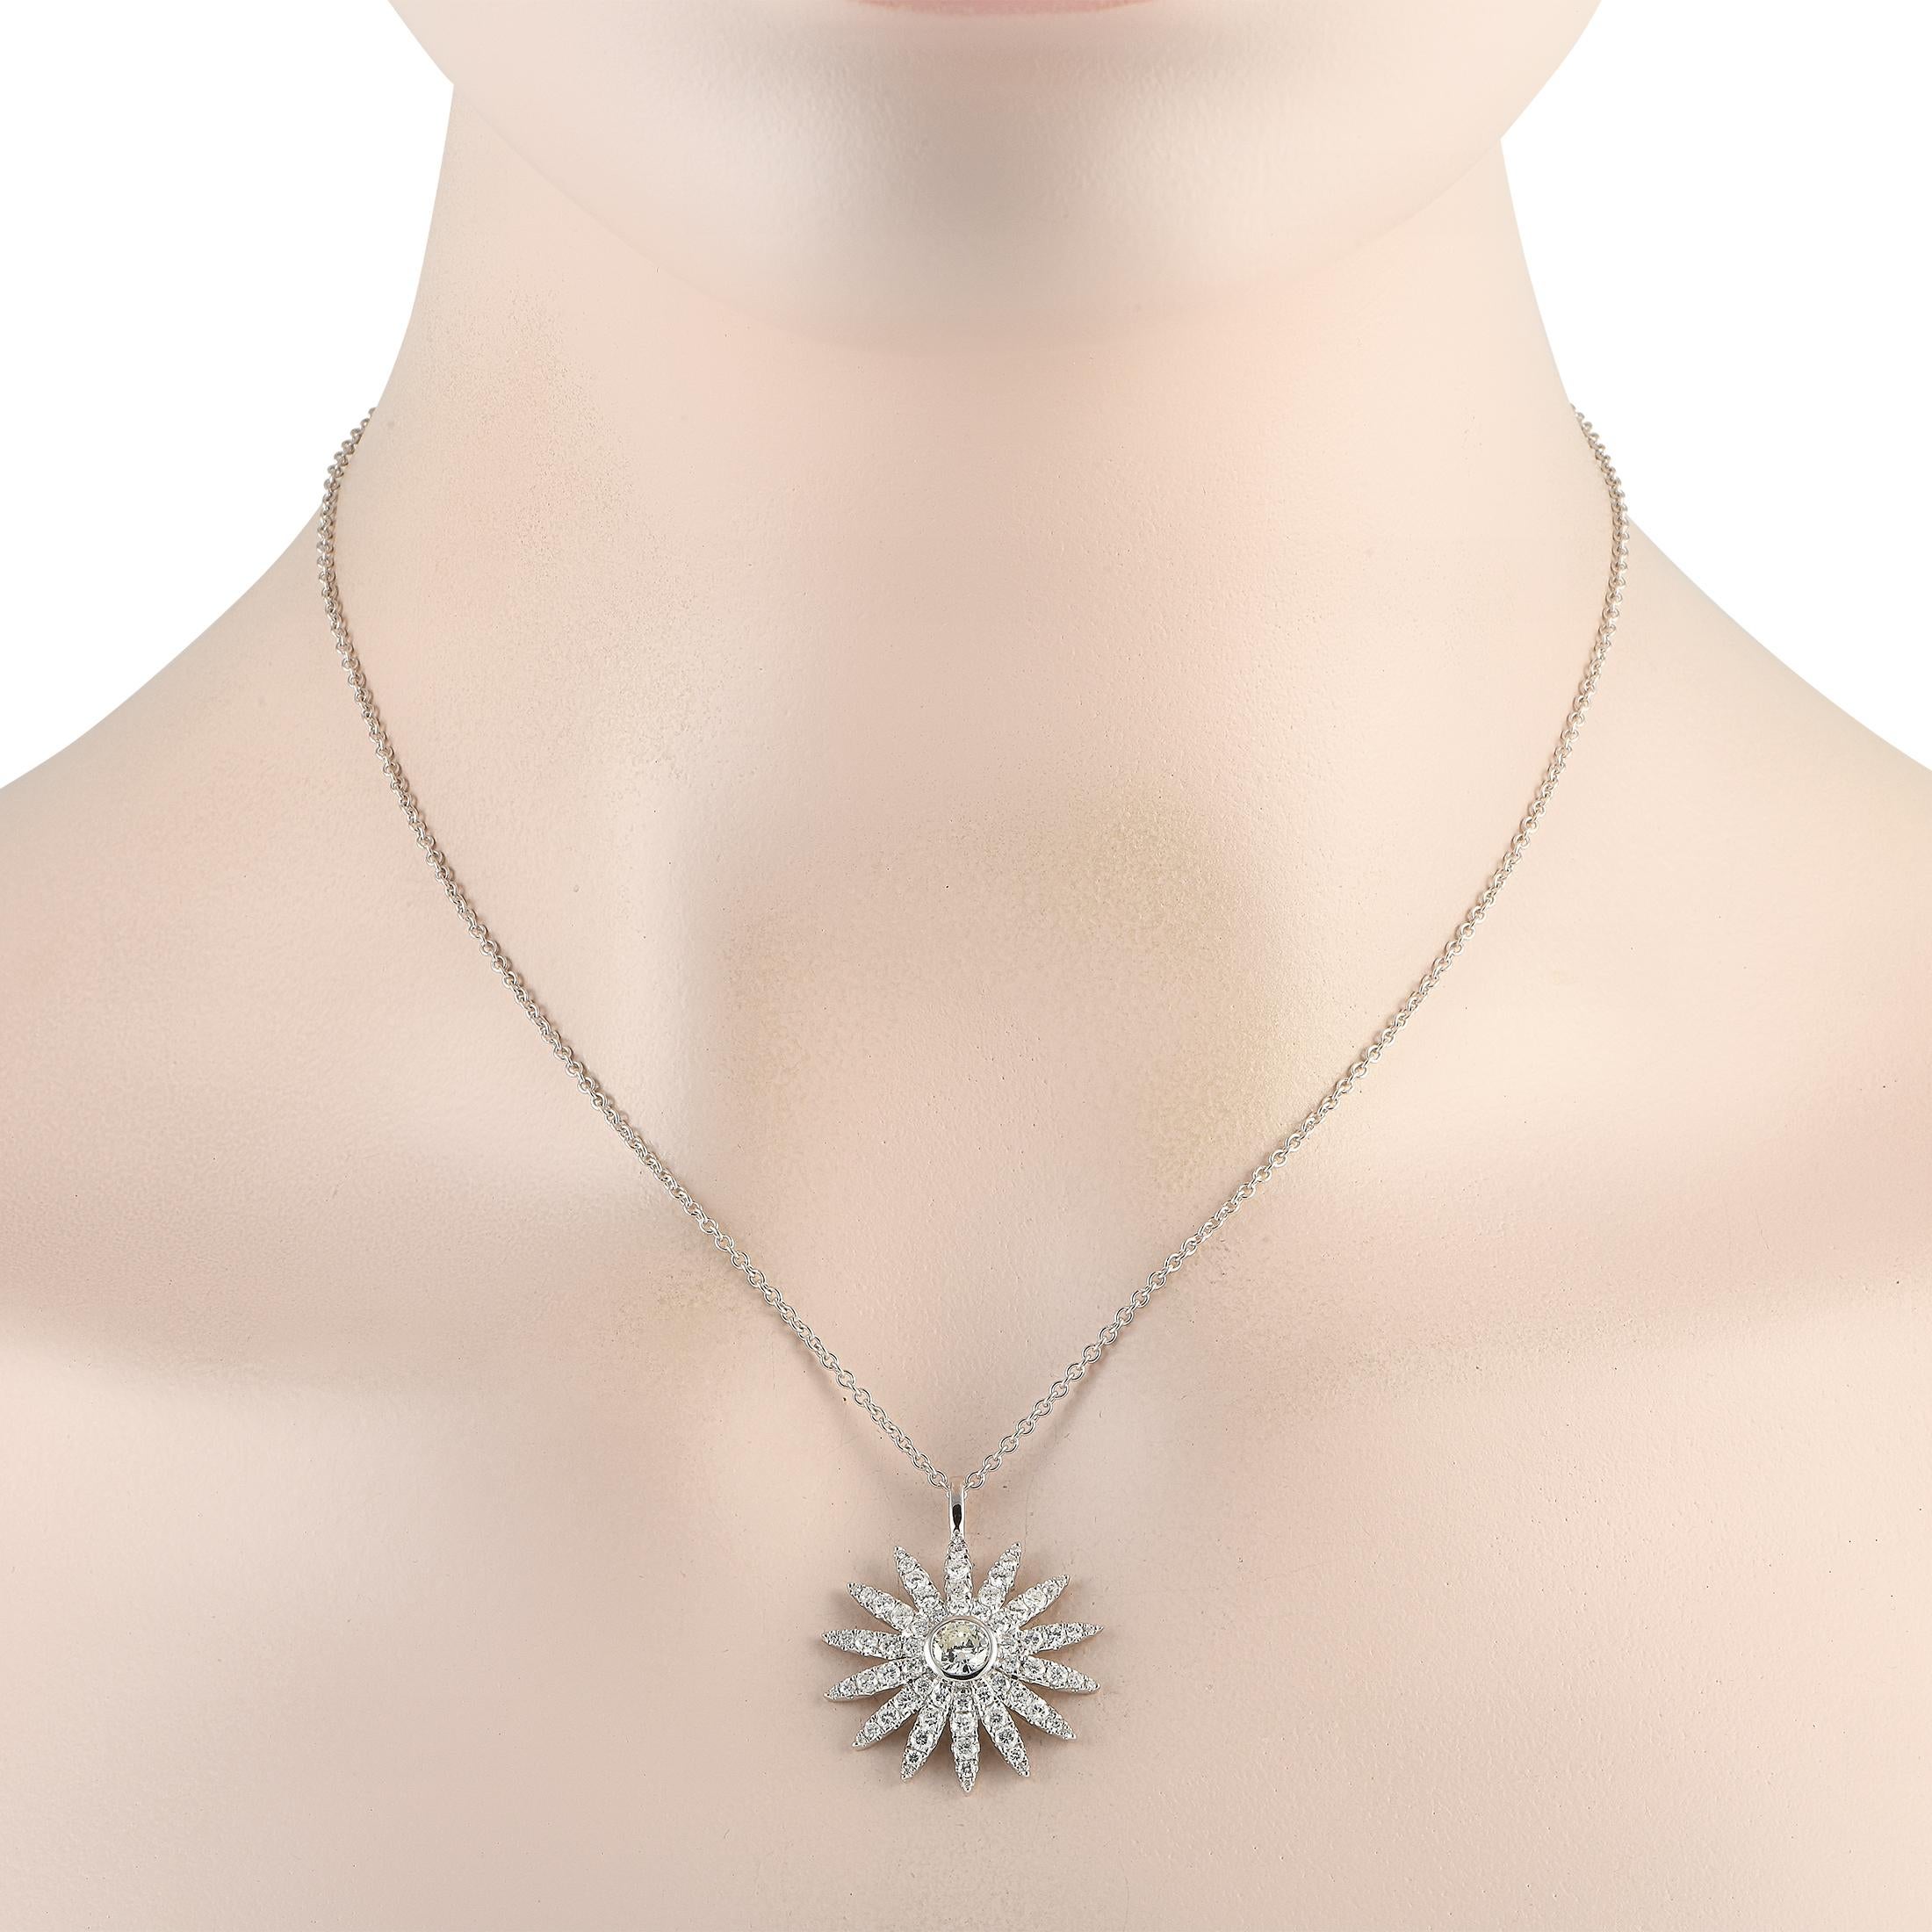 Sparkle and shine with this 18K white gold diamond necklace. An piece, it features a 17-long chain holding a 1.15 x 1.00 sunflower-inspired pendant. A 0.42 ct round-cut diamond mounted on a bezel sits at the center of the pendant. Golden rays traced